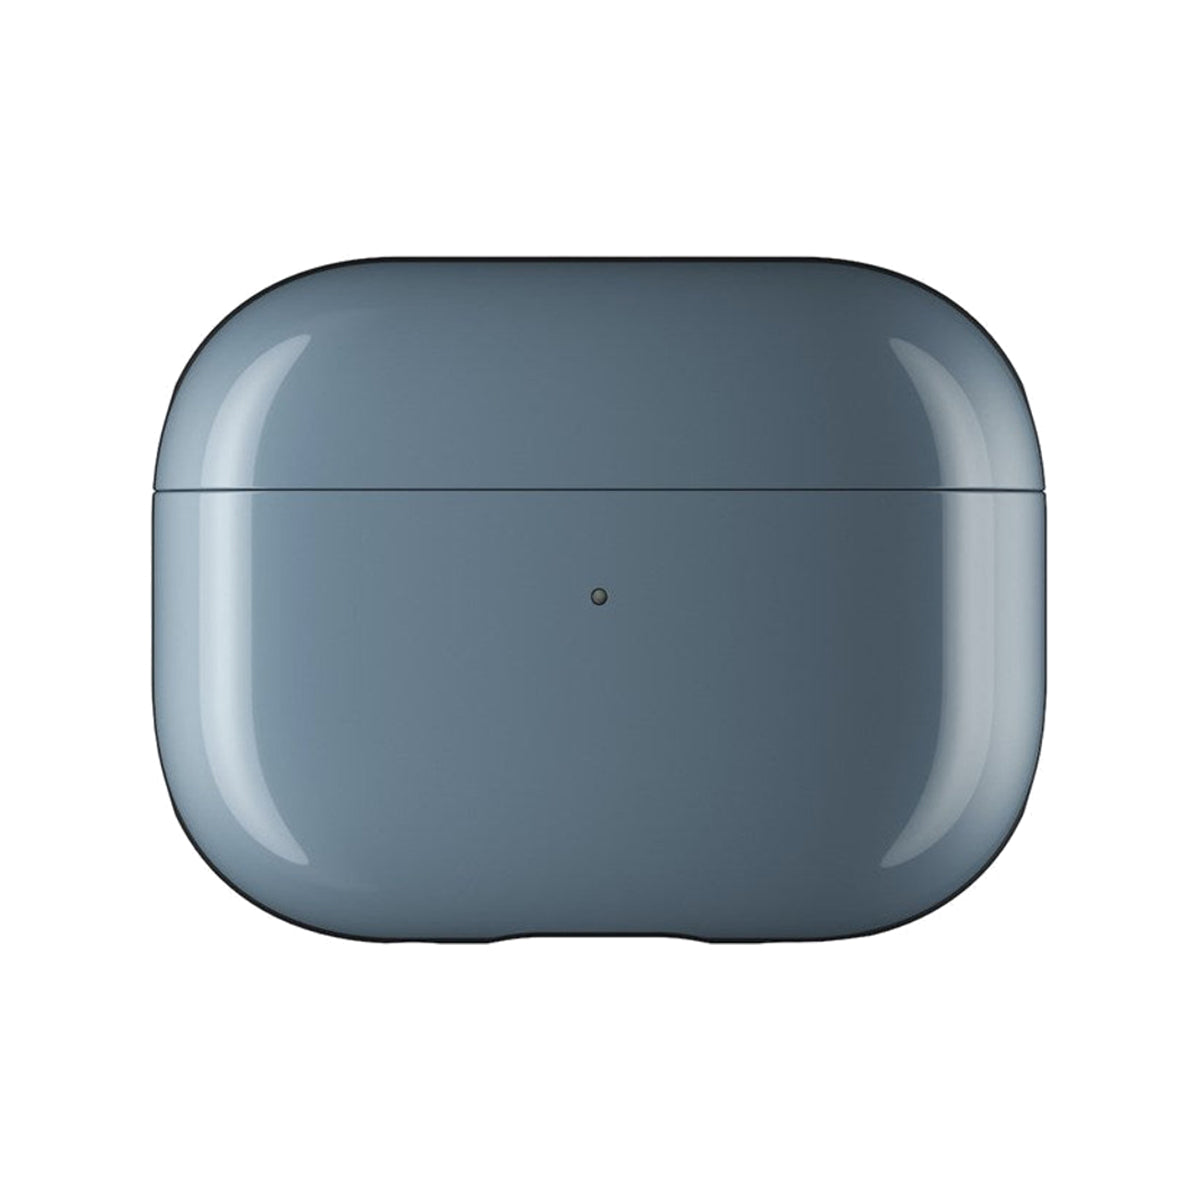 NOMAD Sport Case For Airpods Pro (2nd gen) - Marine Blue